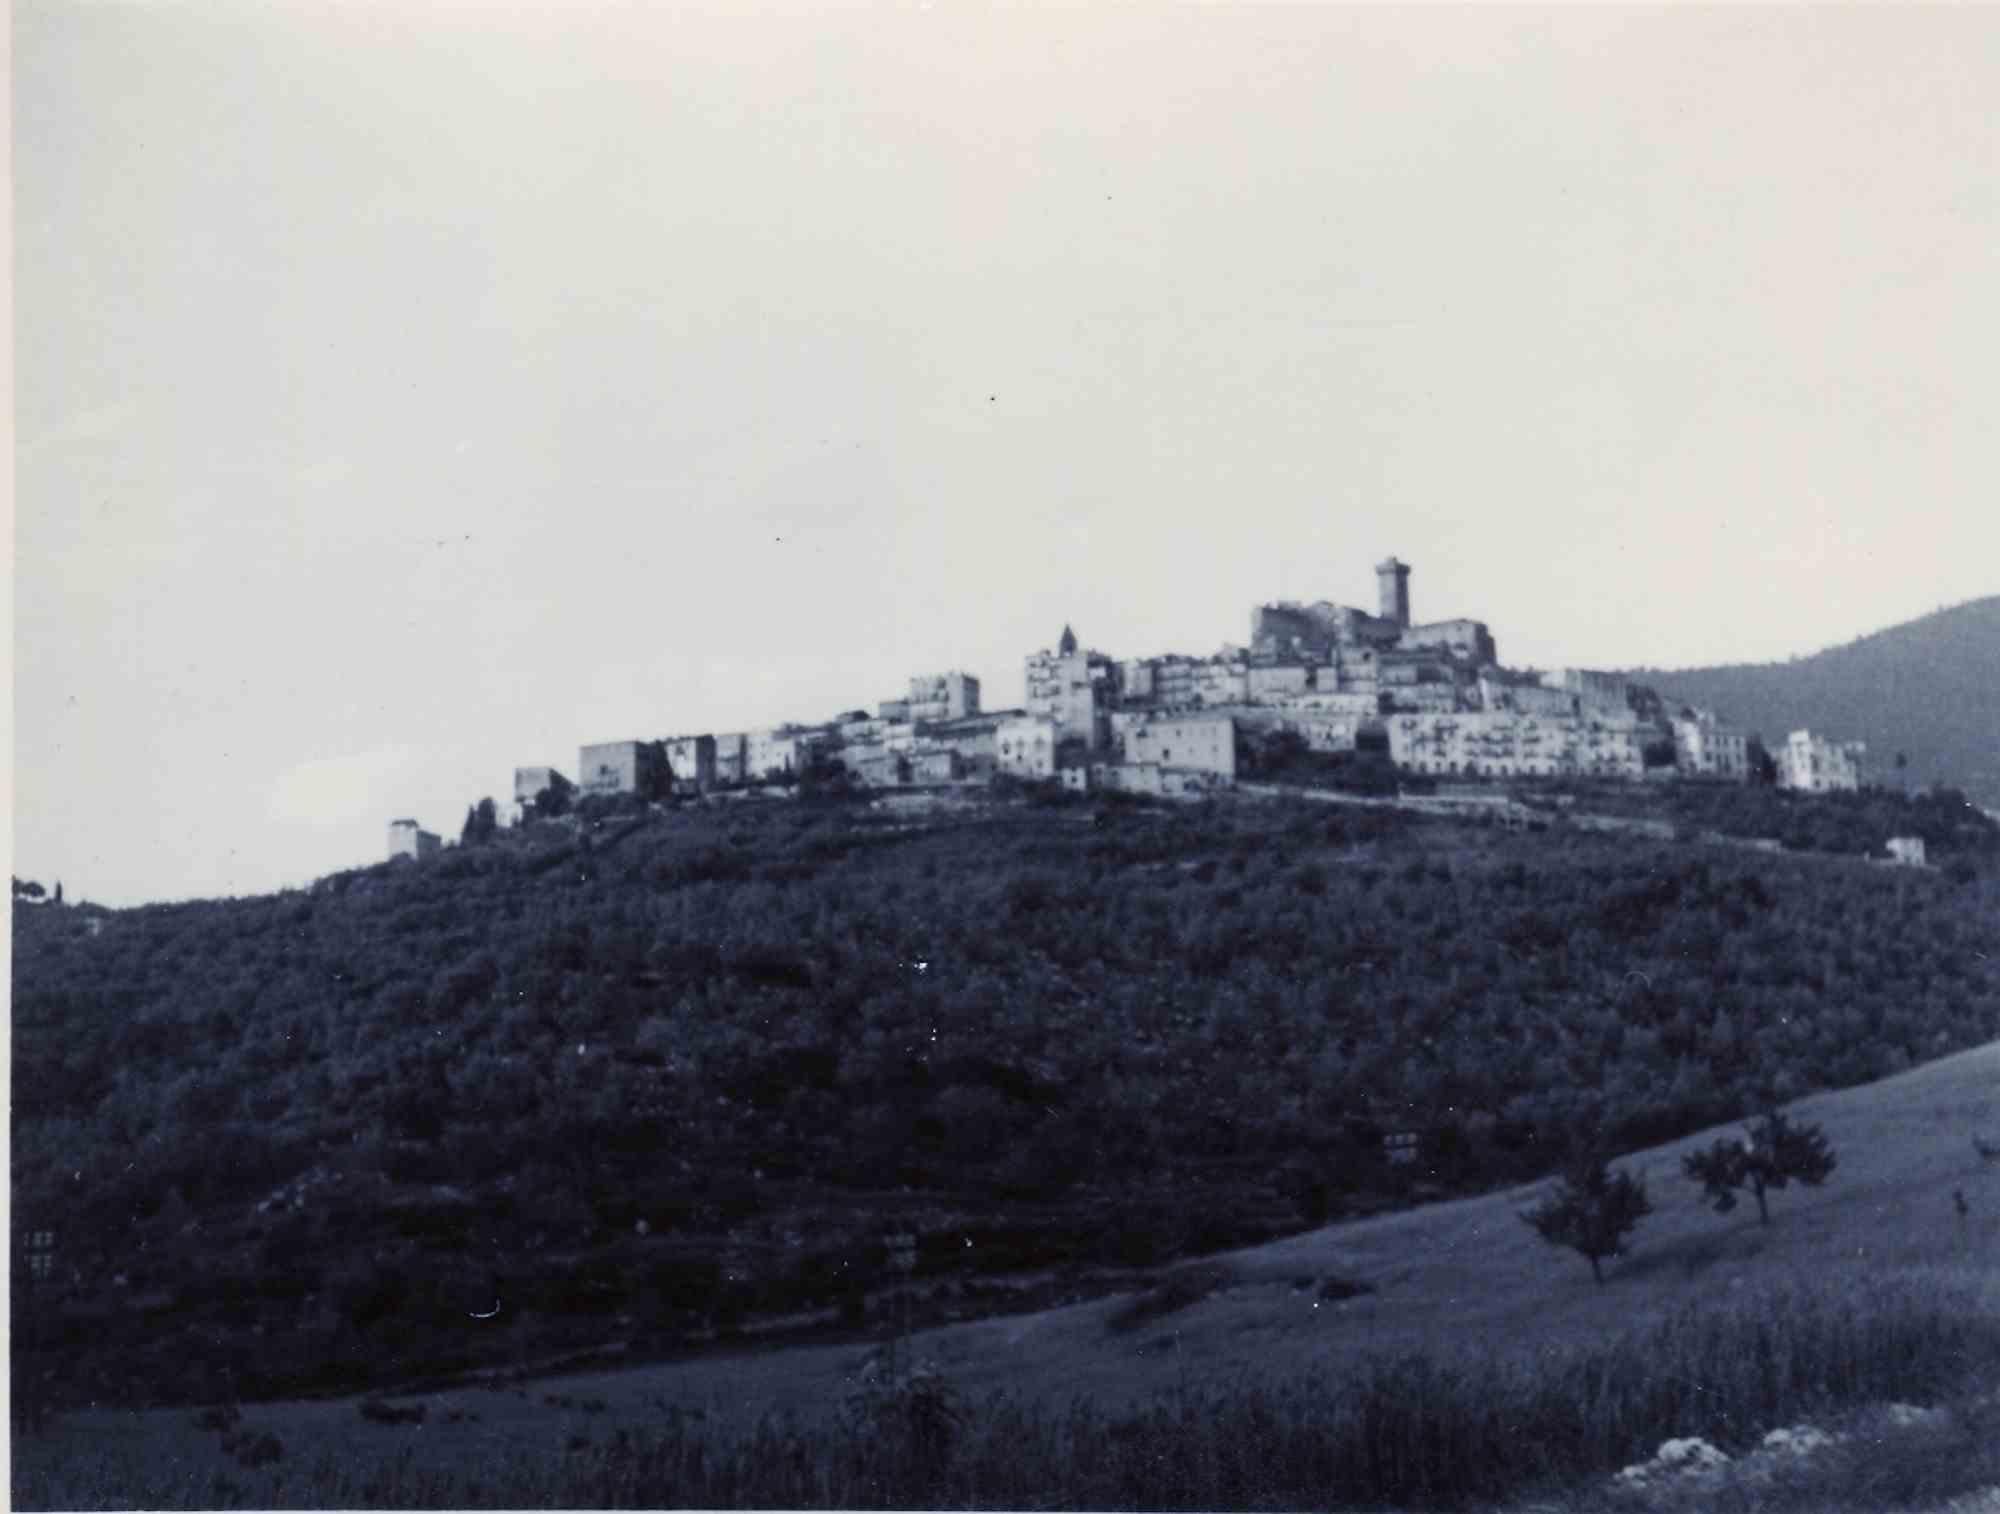 Unknown Figurative Photograph - Old Days Photo - Village on Top-hill - Vintage Photo - mid-20th Century